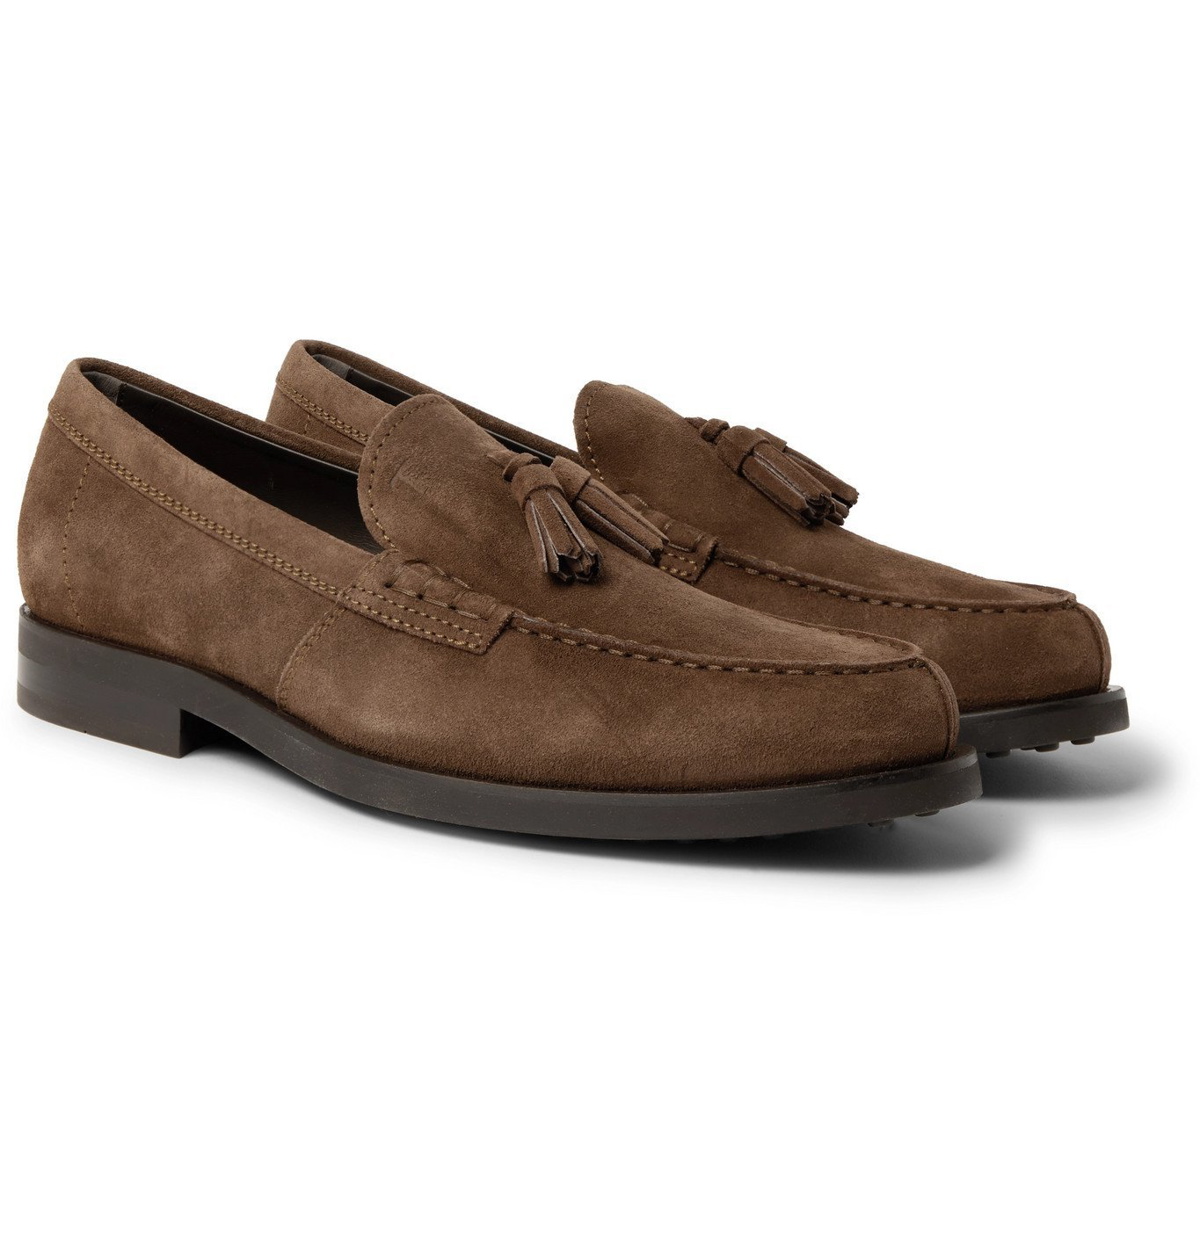 Tod's - Suede Tasselled Loafers - Brown Tod's